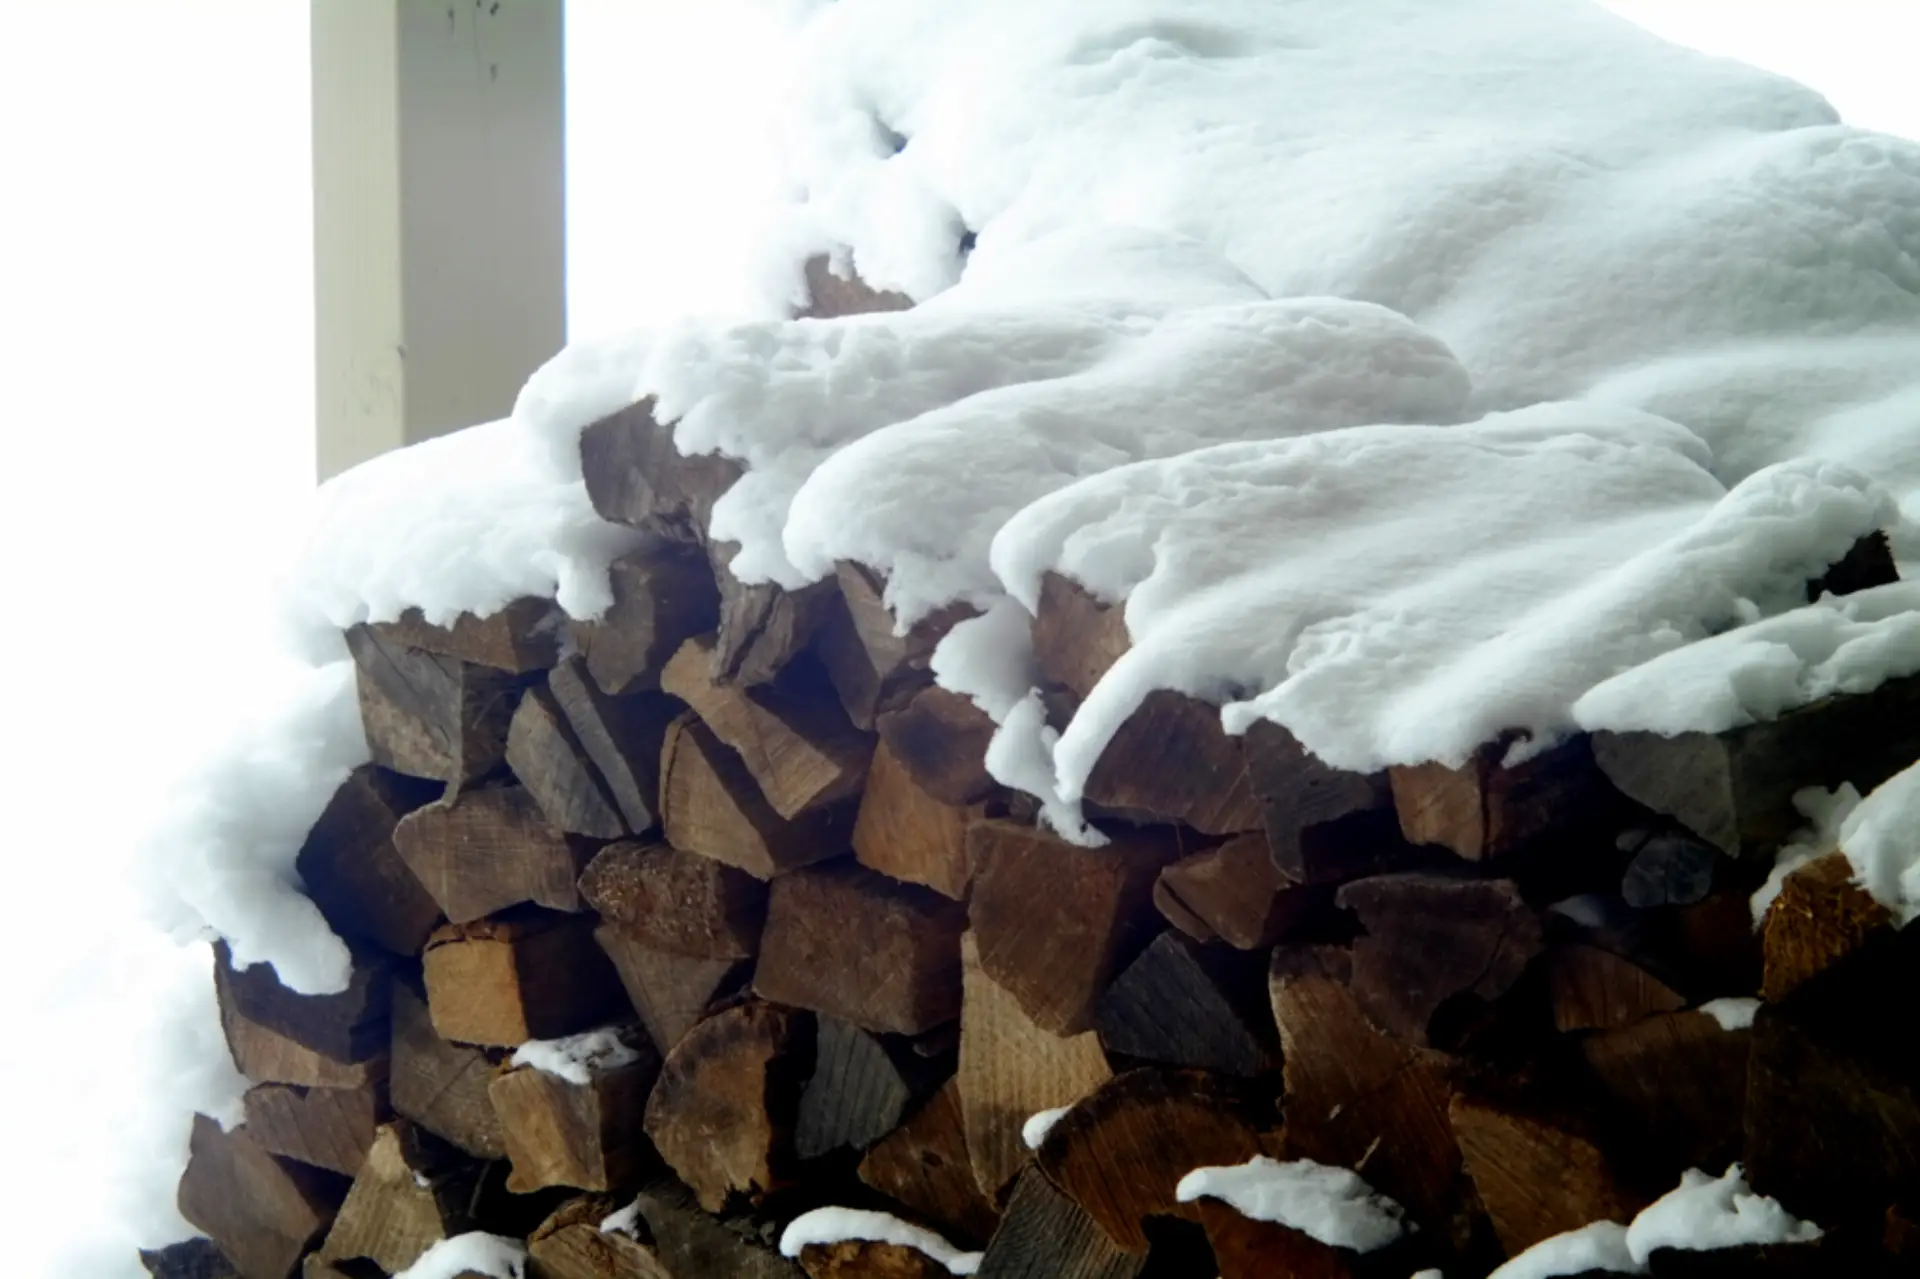 A snowy wood pile out back